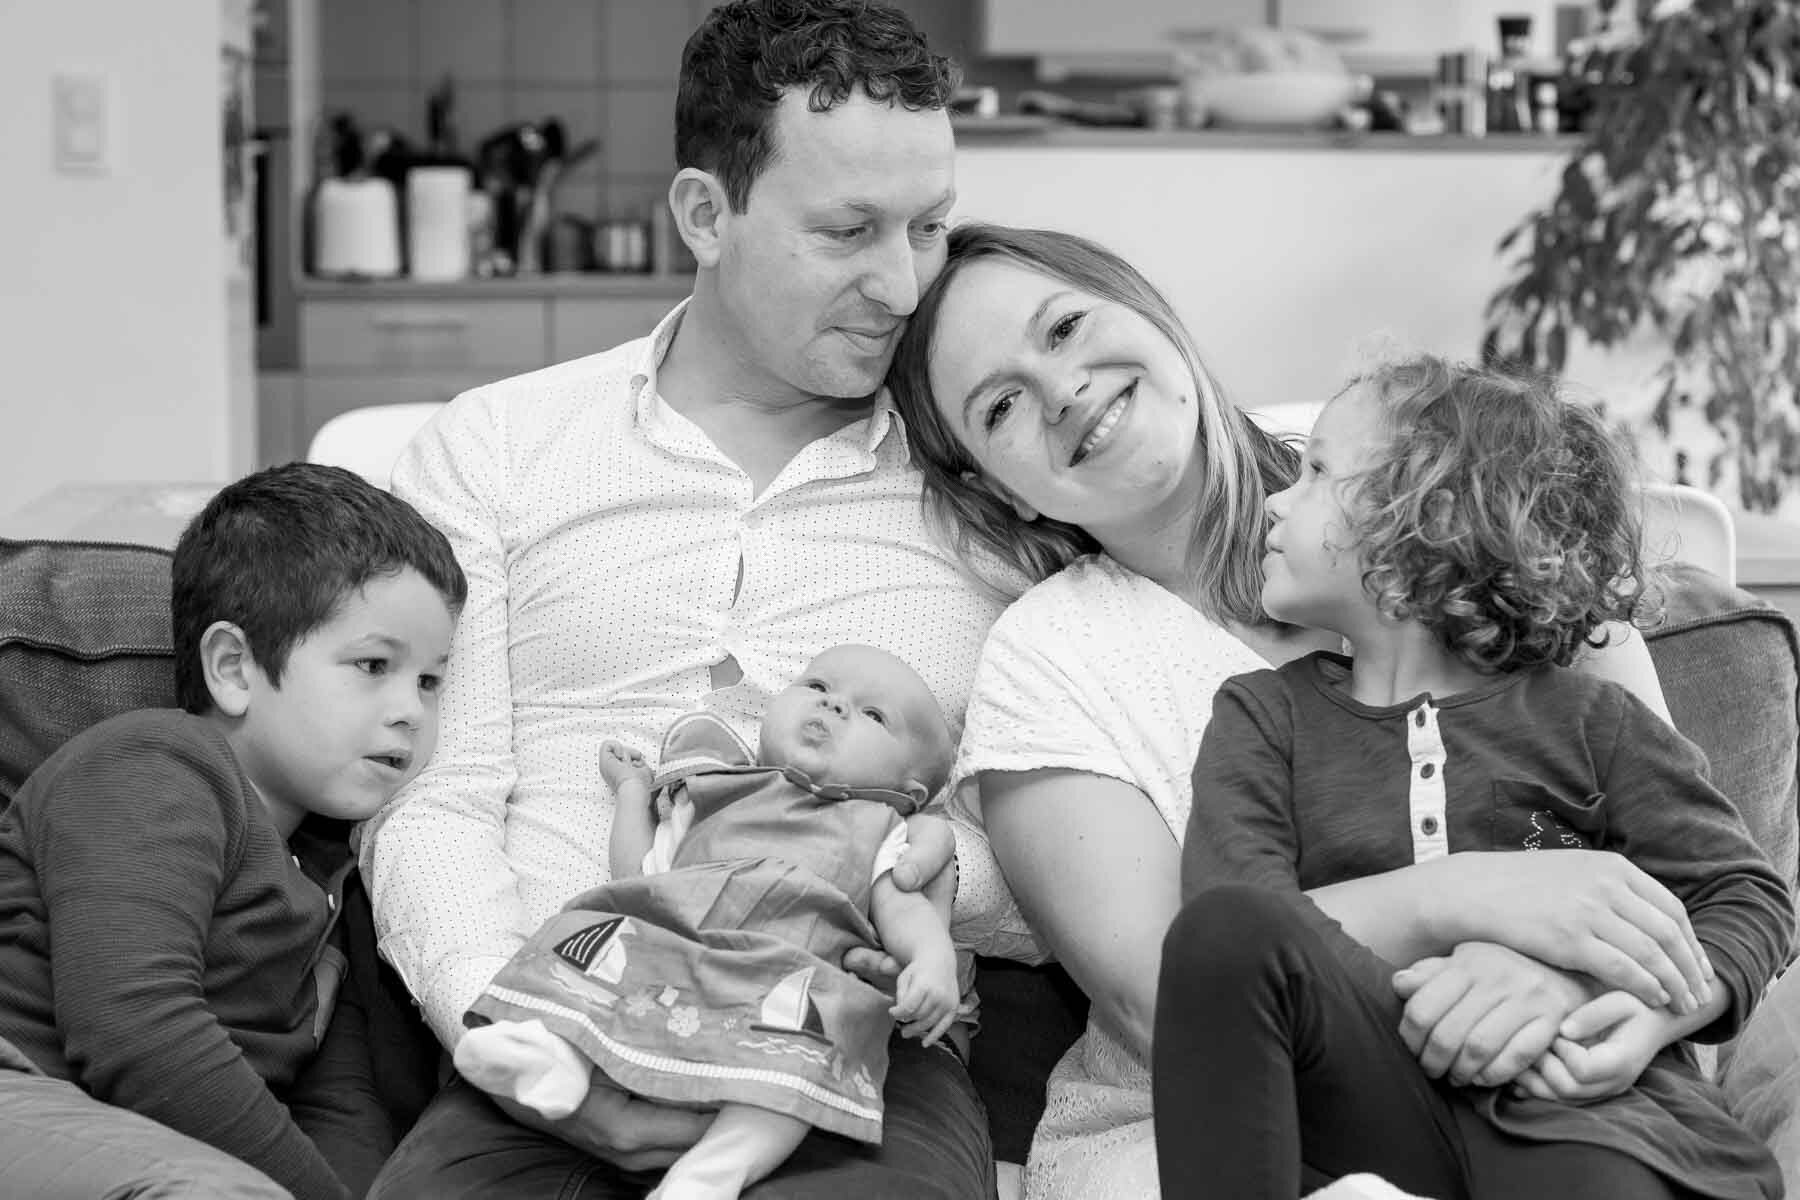  I photographed this family in their home, with their new baby. They were interested in having some black and white images, and I particularly like the composition of this one. 